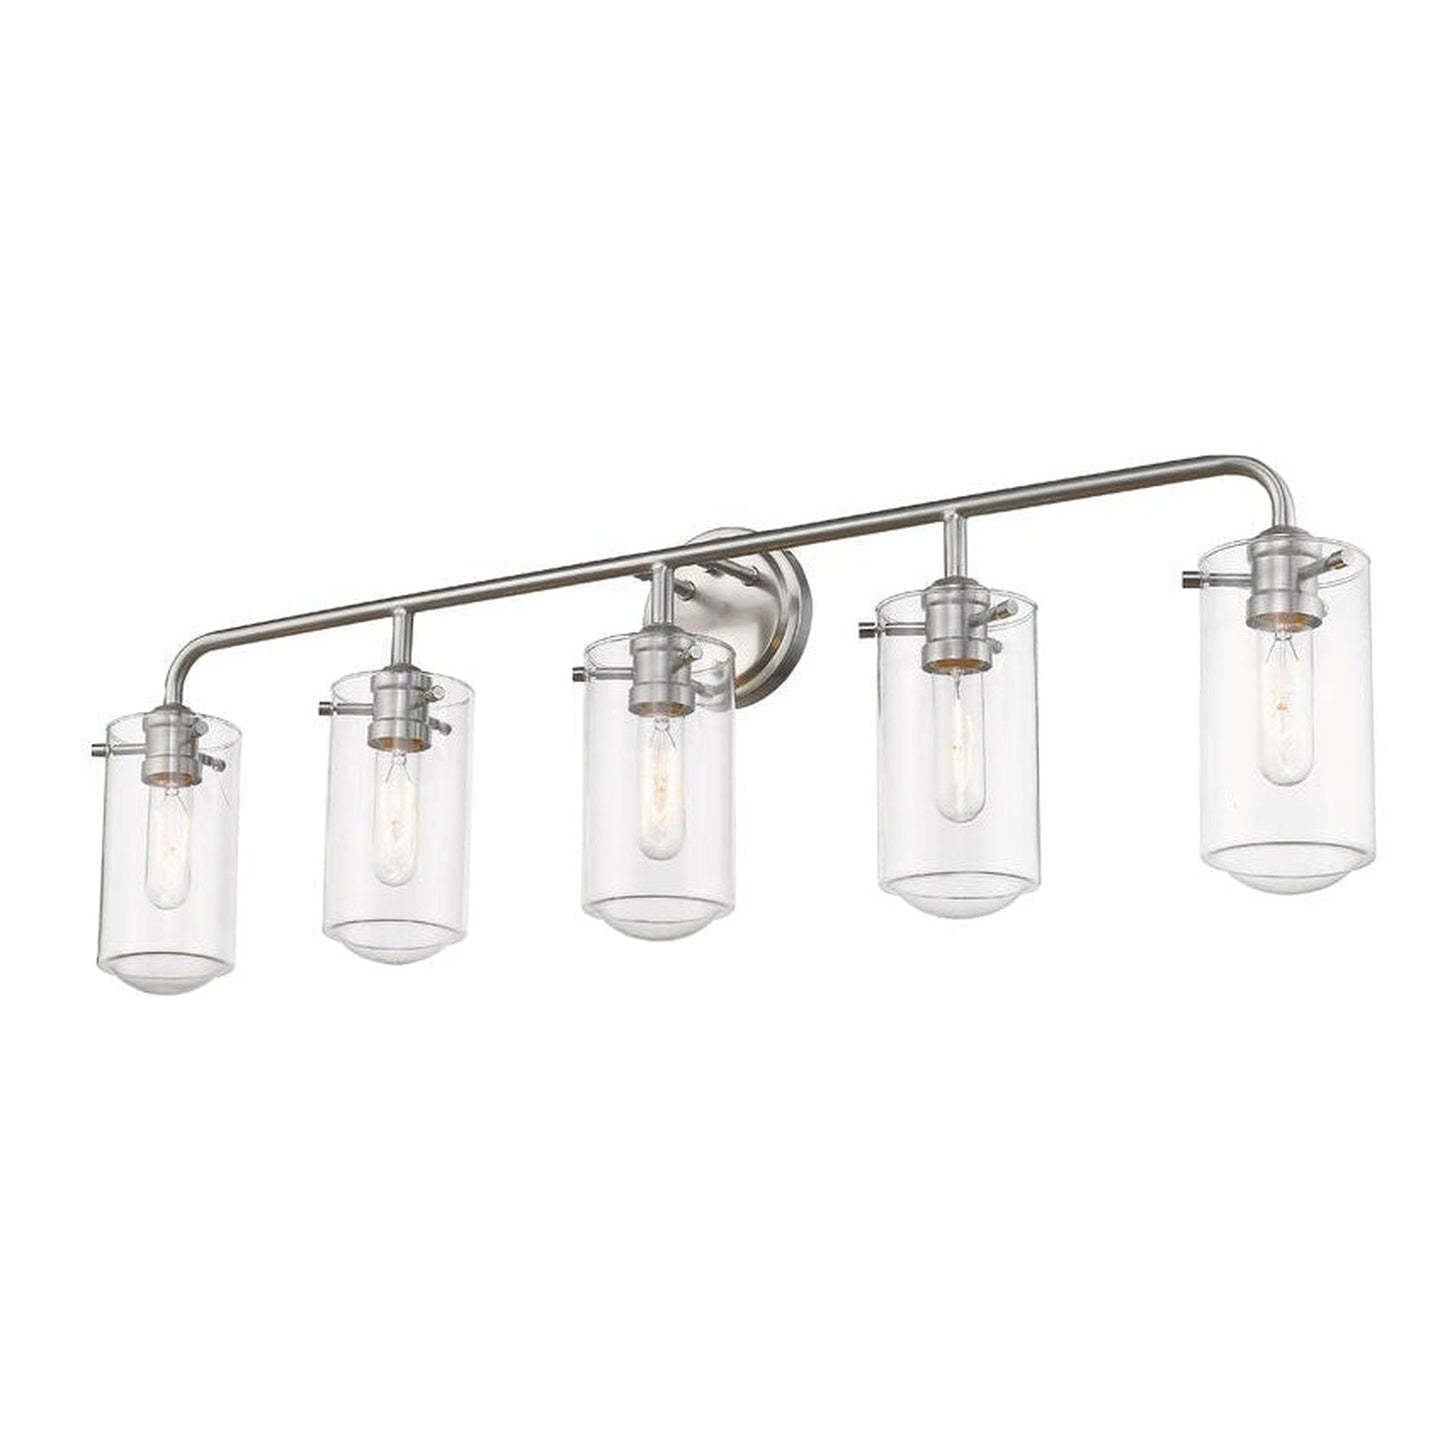 Z-Lite Delaney 38" 5-Light Brushed Nickel Vanity Light With Clear Glass Shade